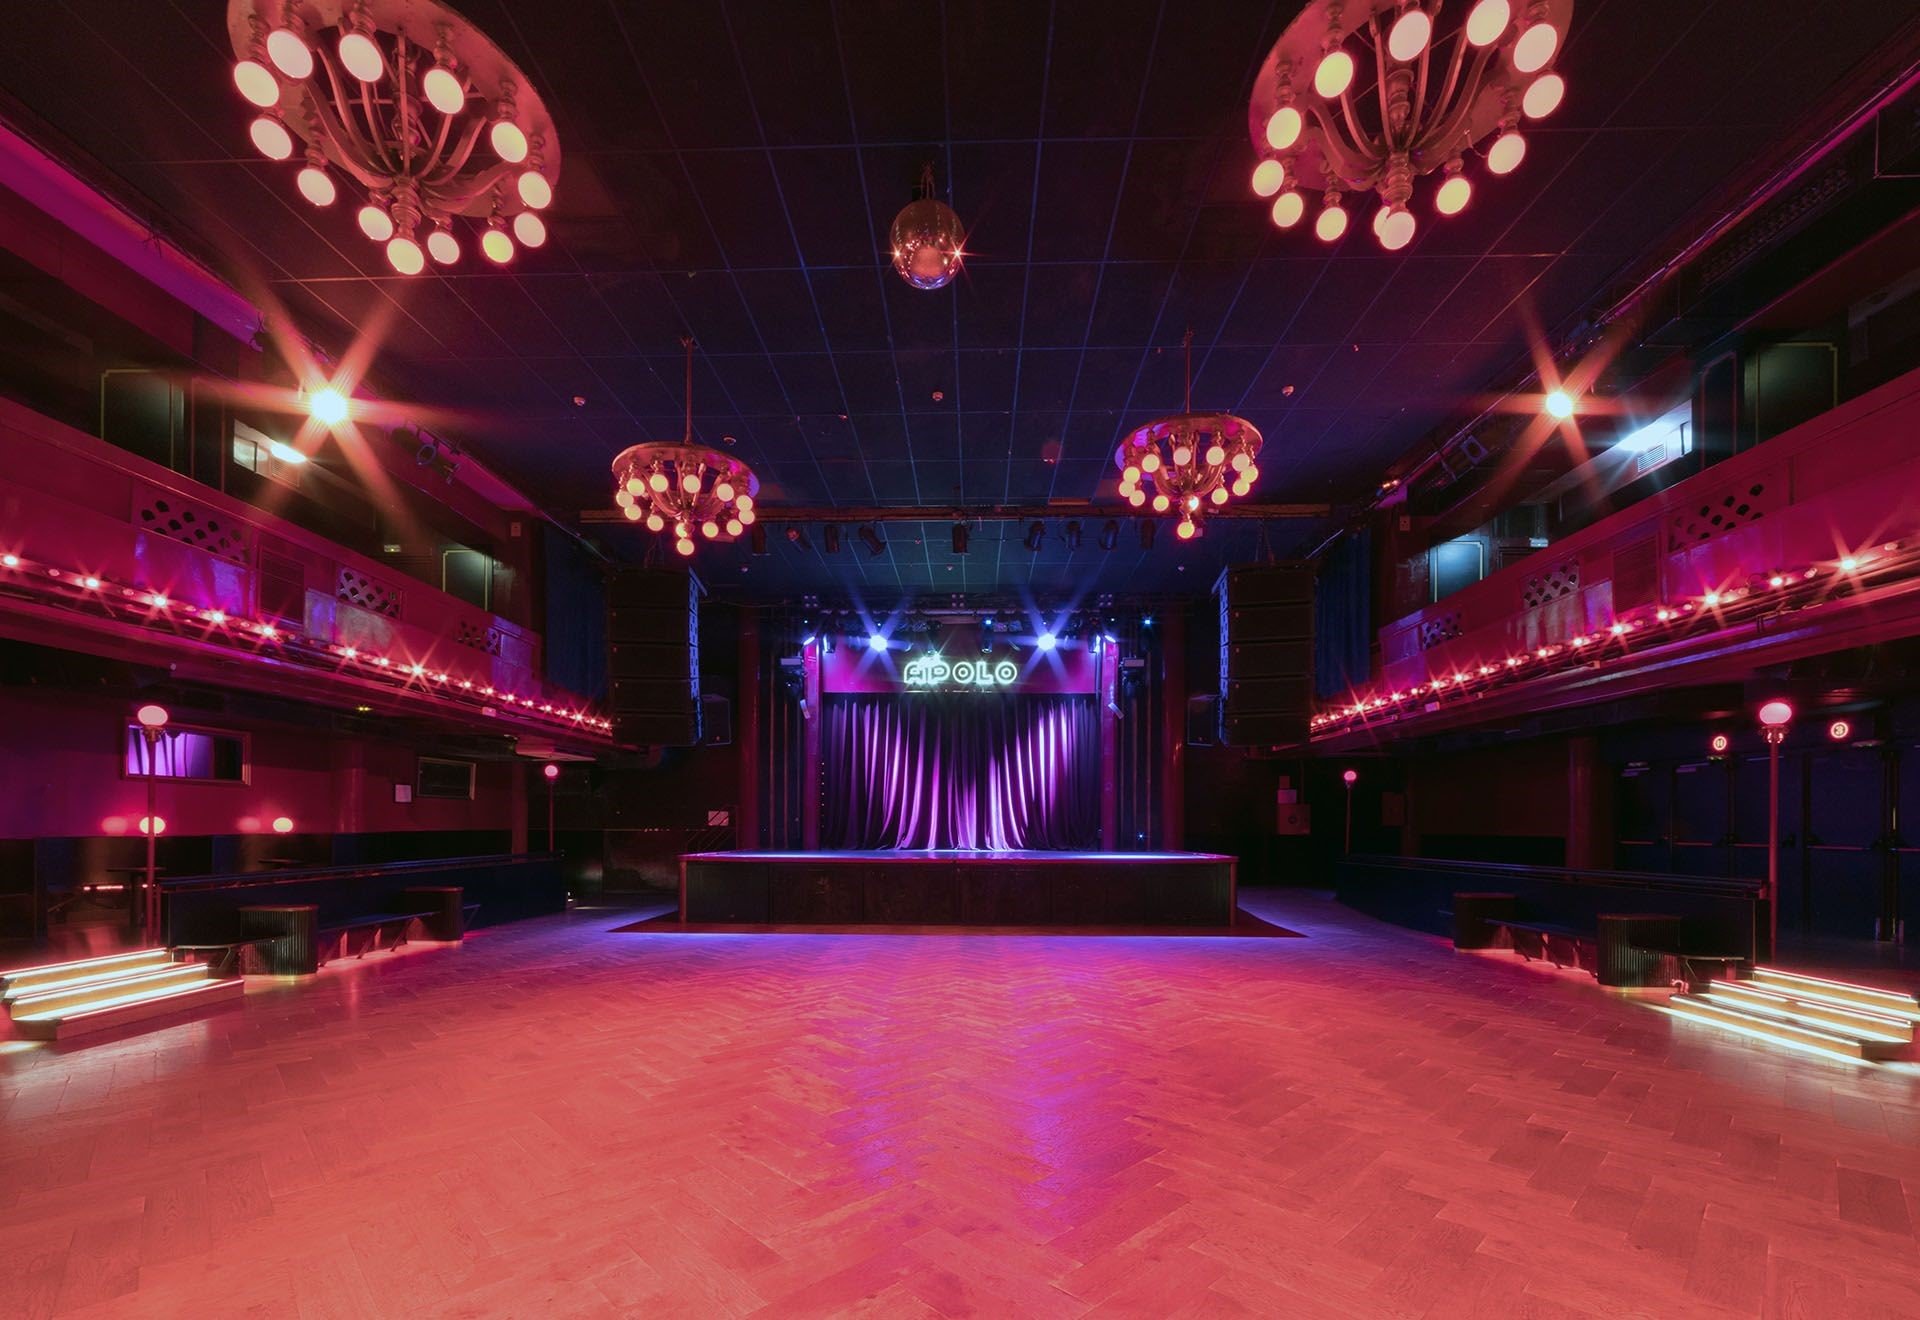 20-captivating-facts-about-sala-apolo